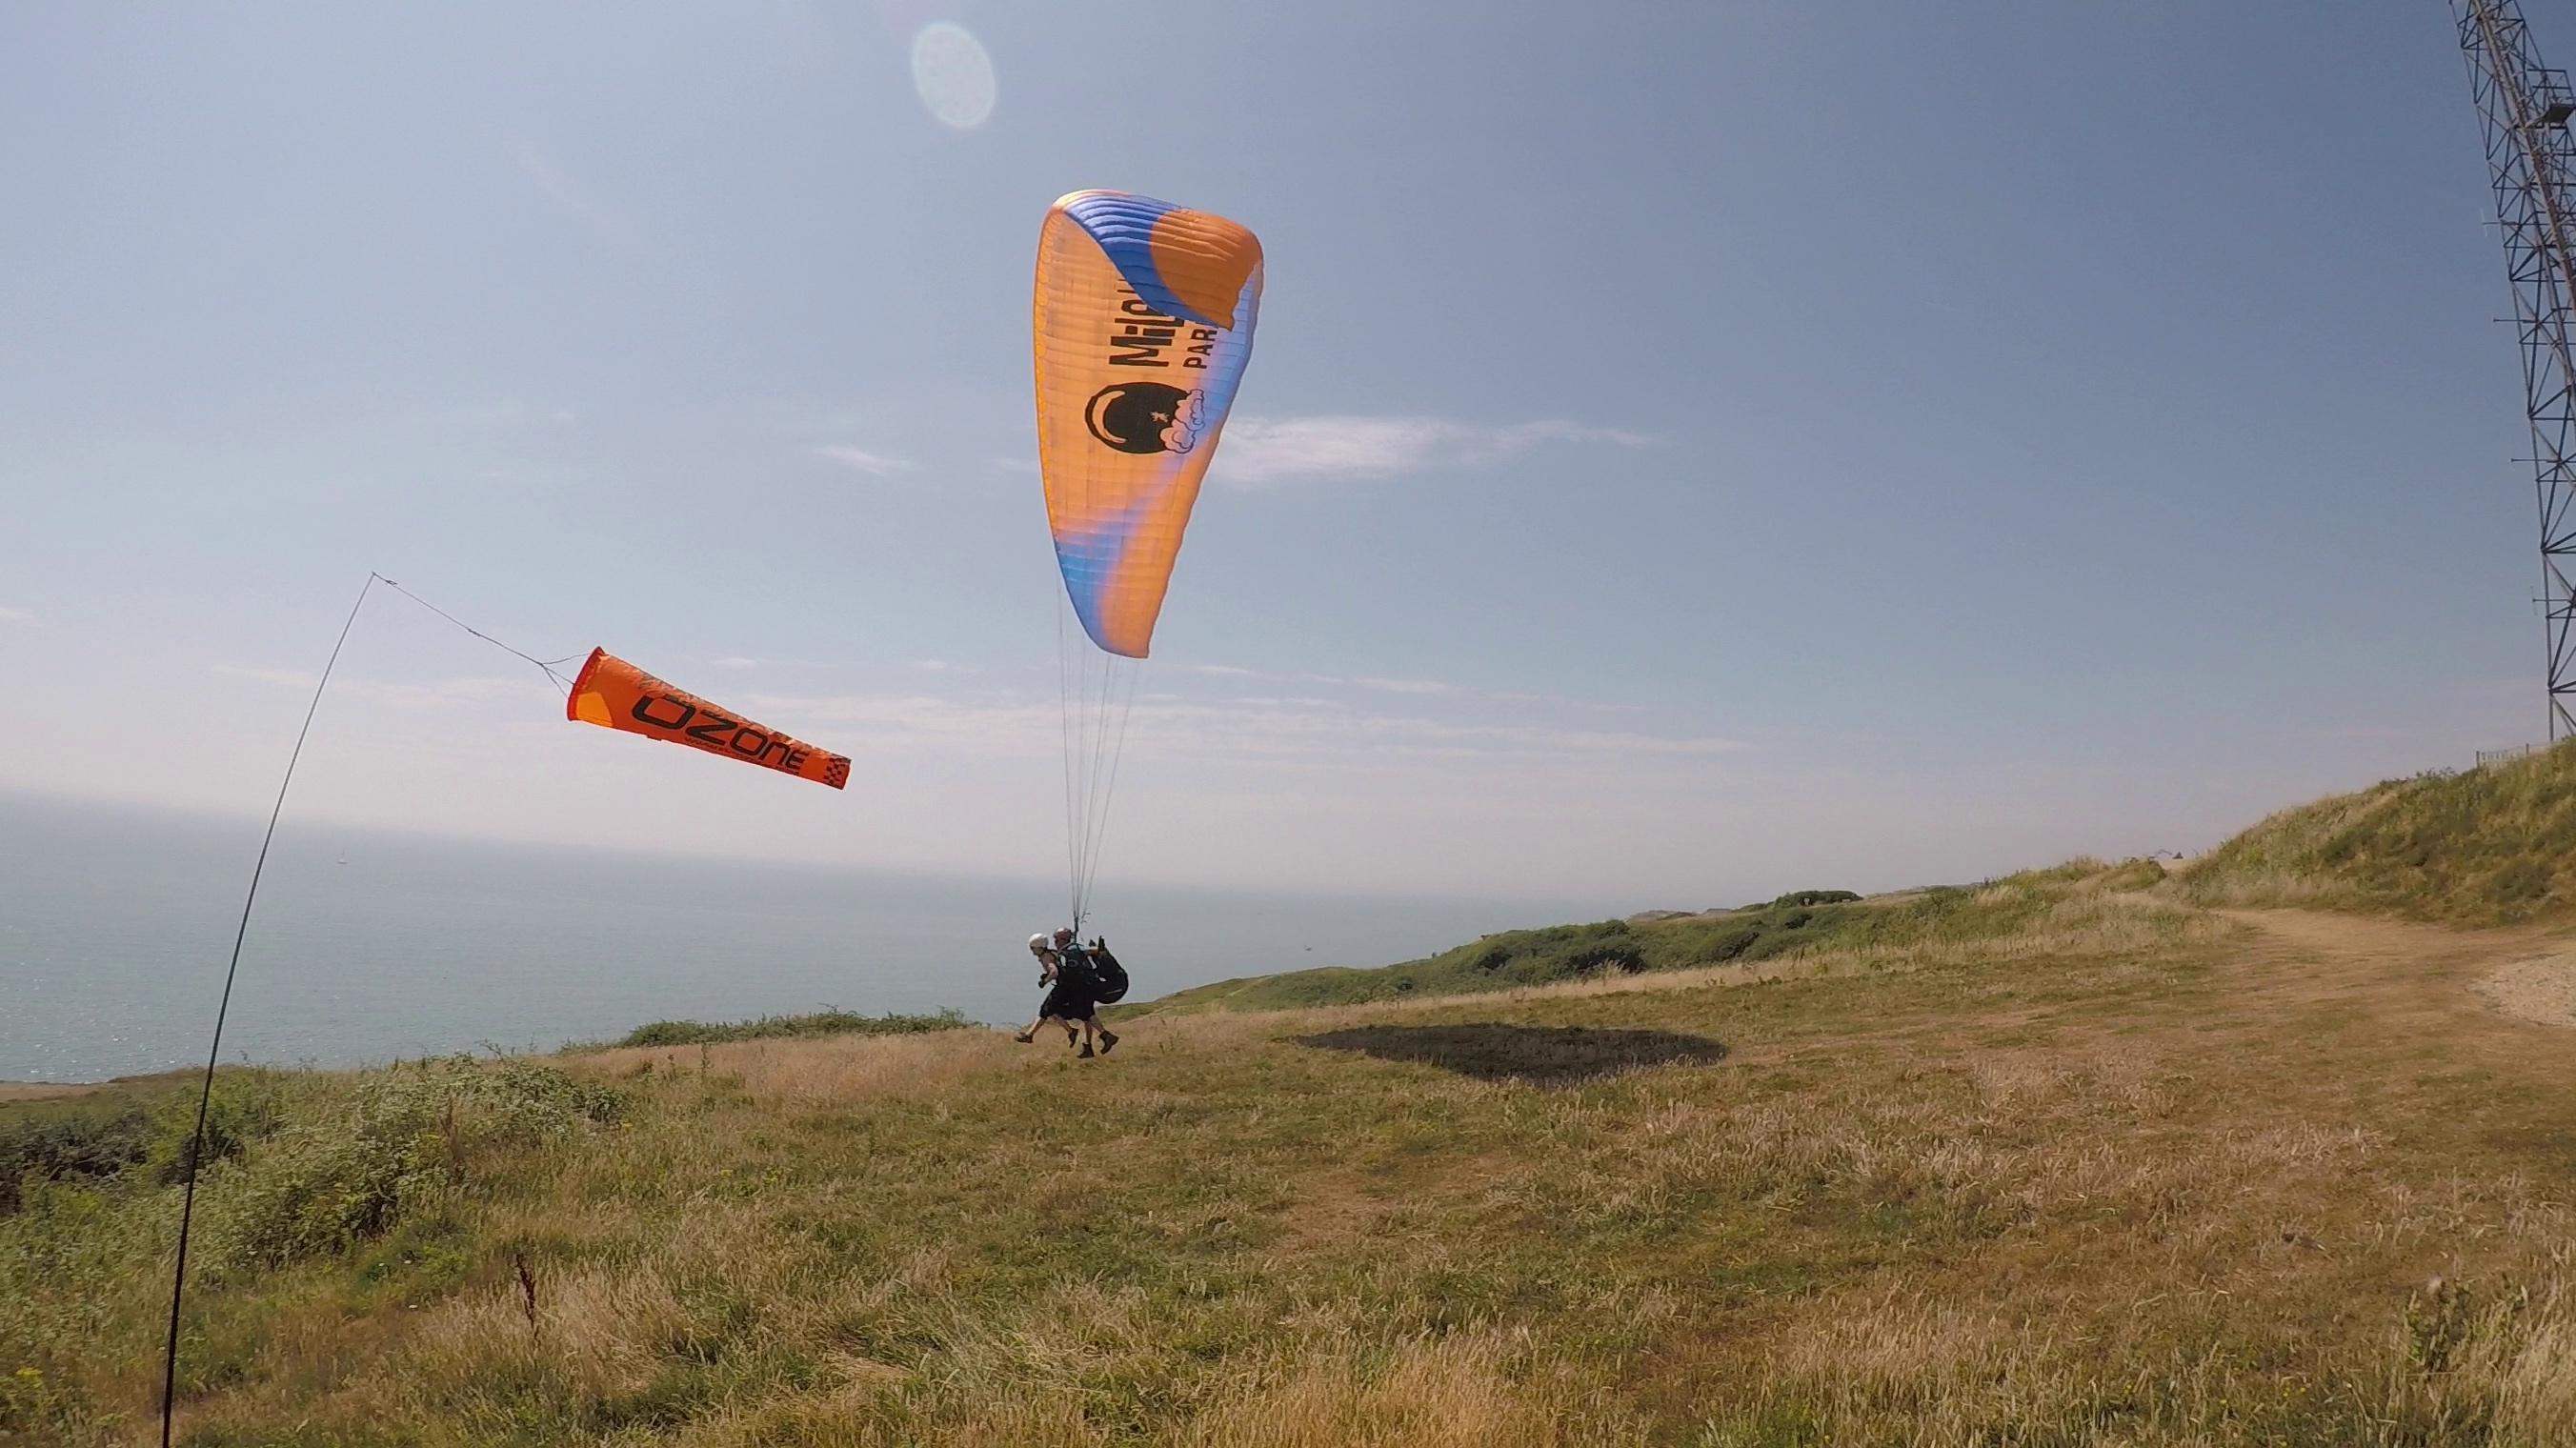 Taking off from Newhaven on a Tandem paragliding flight experience with Mile High Paragliding